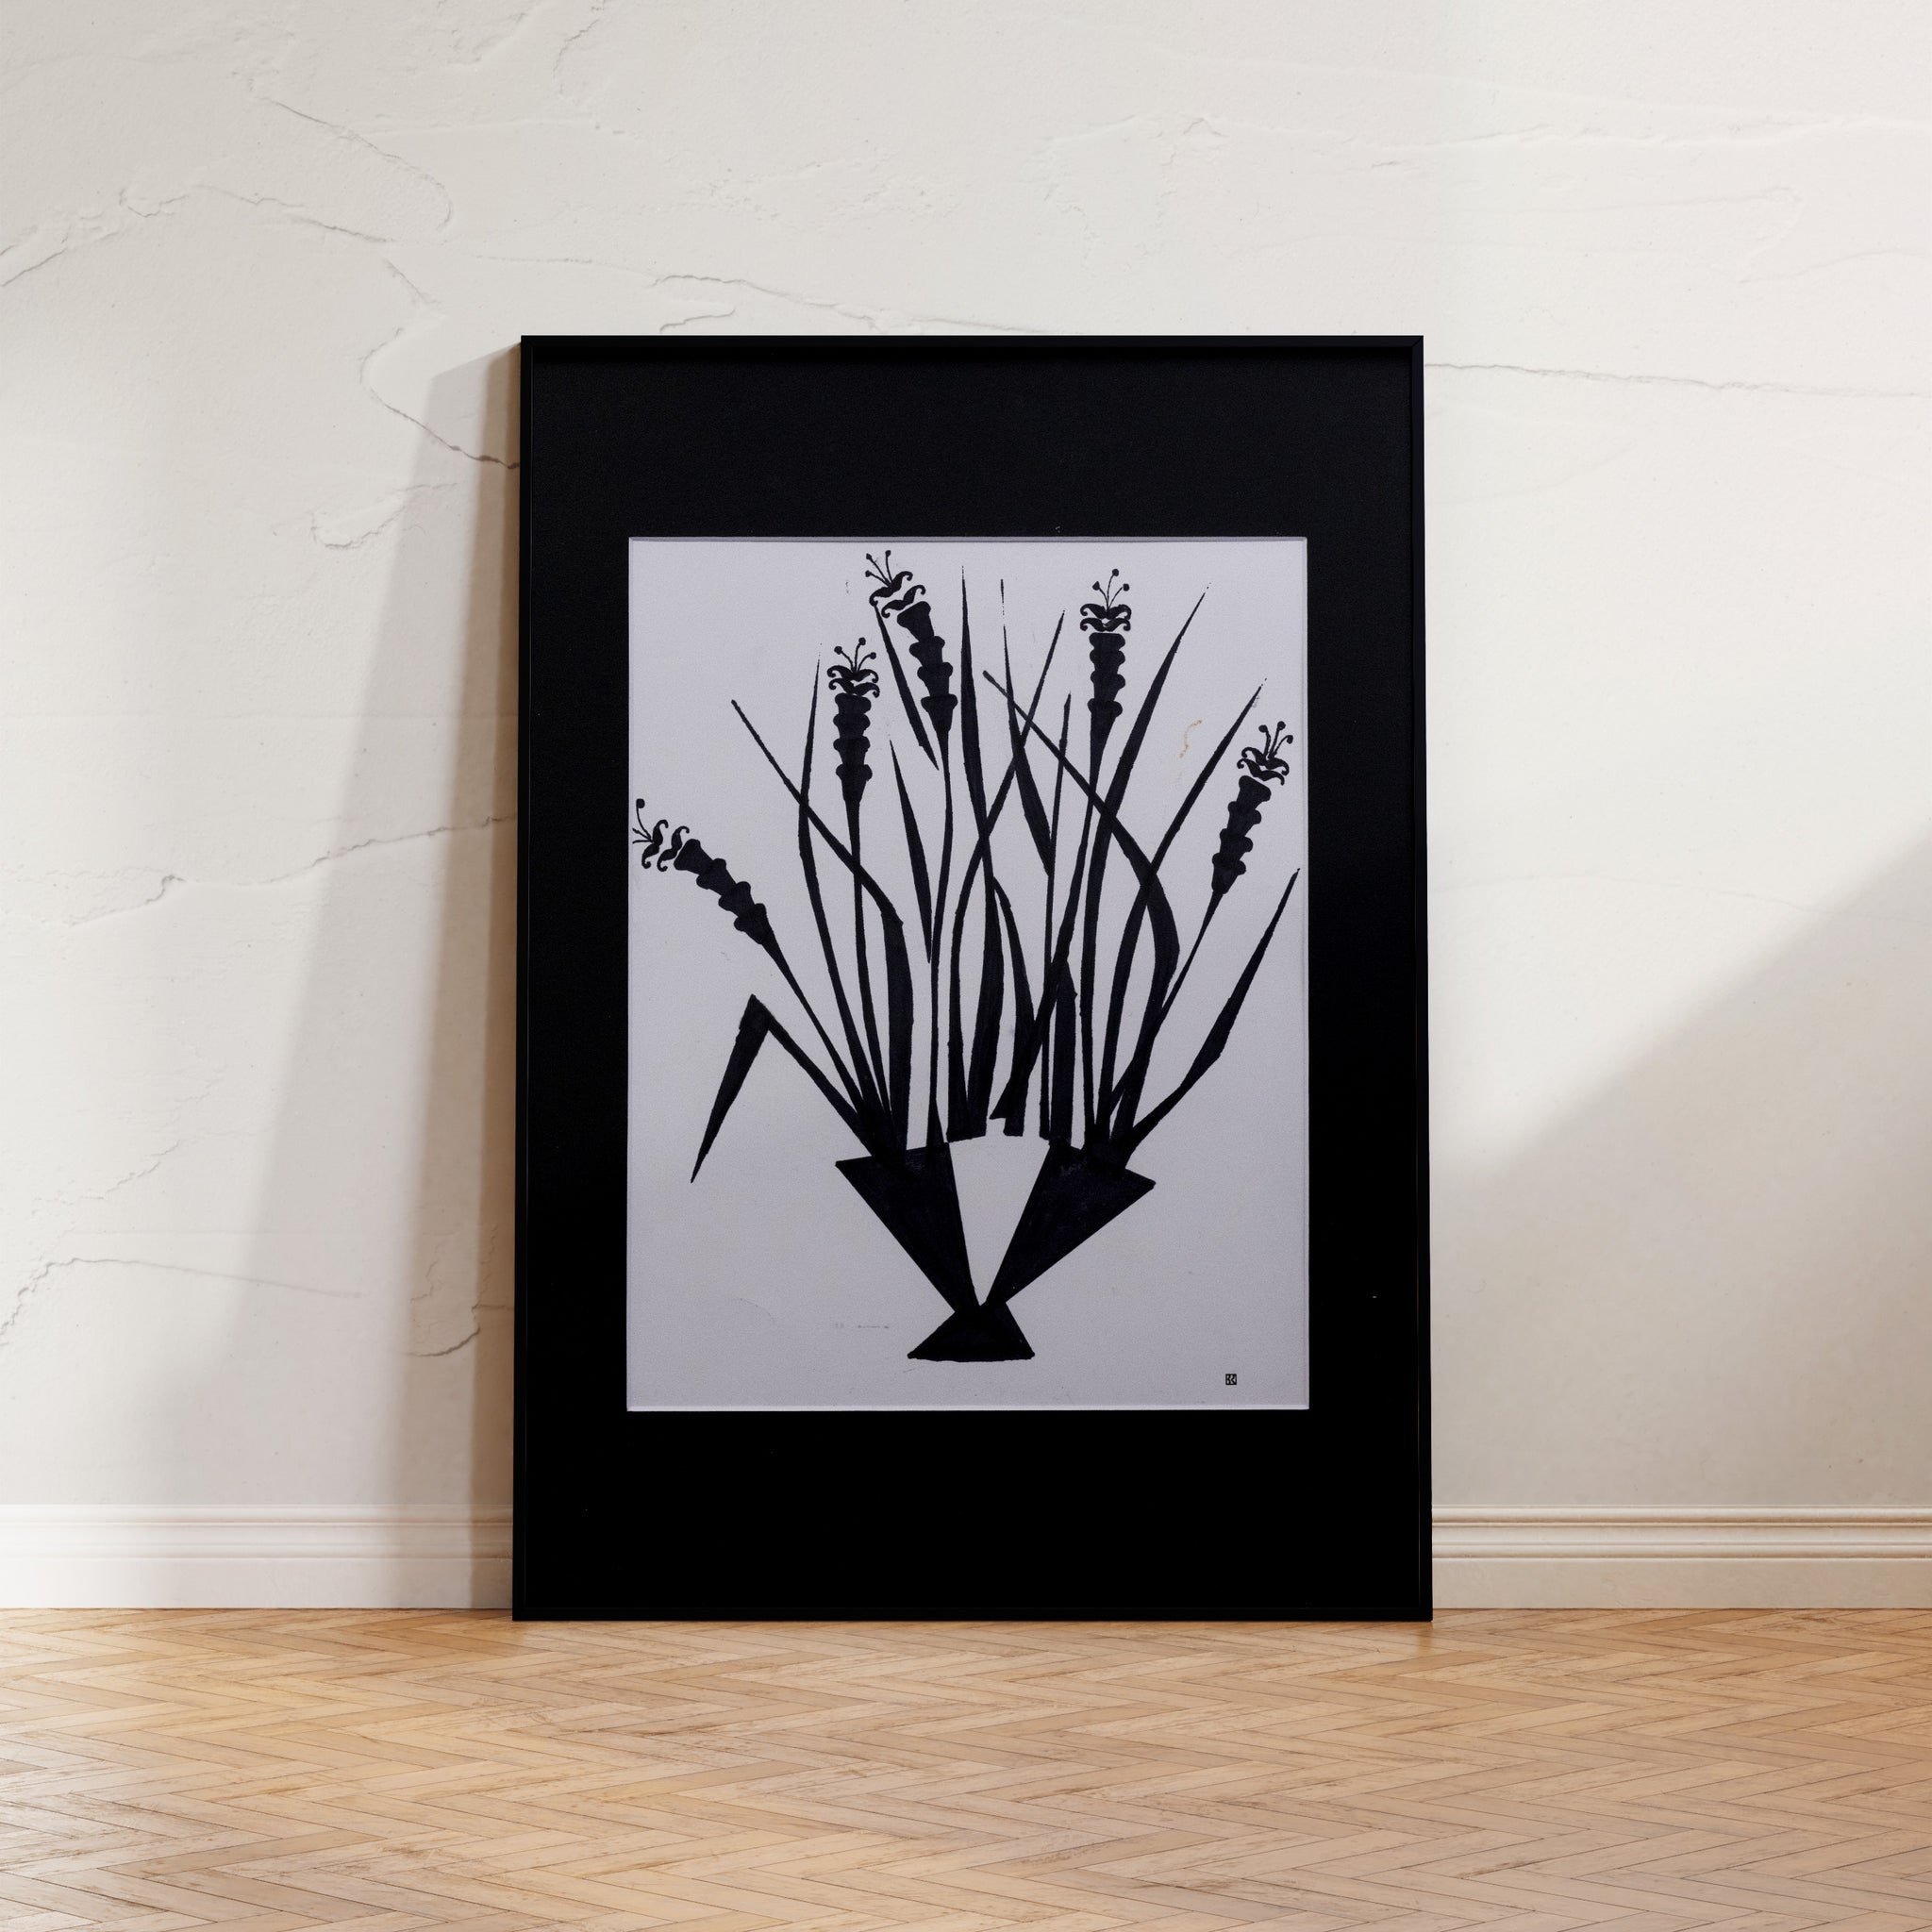 A black and white print titled "Mono No Aware," featuring a distorted vase and graphic floral designs, symbolizing life's fleeting beauty in a minimalist style.